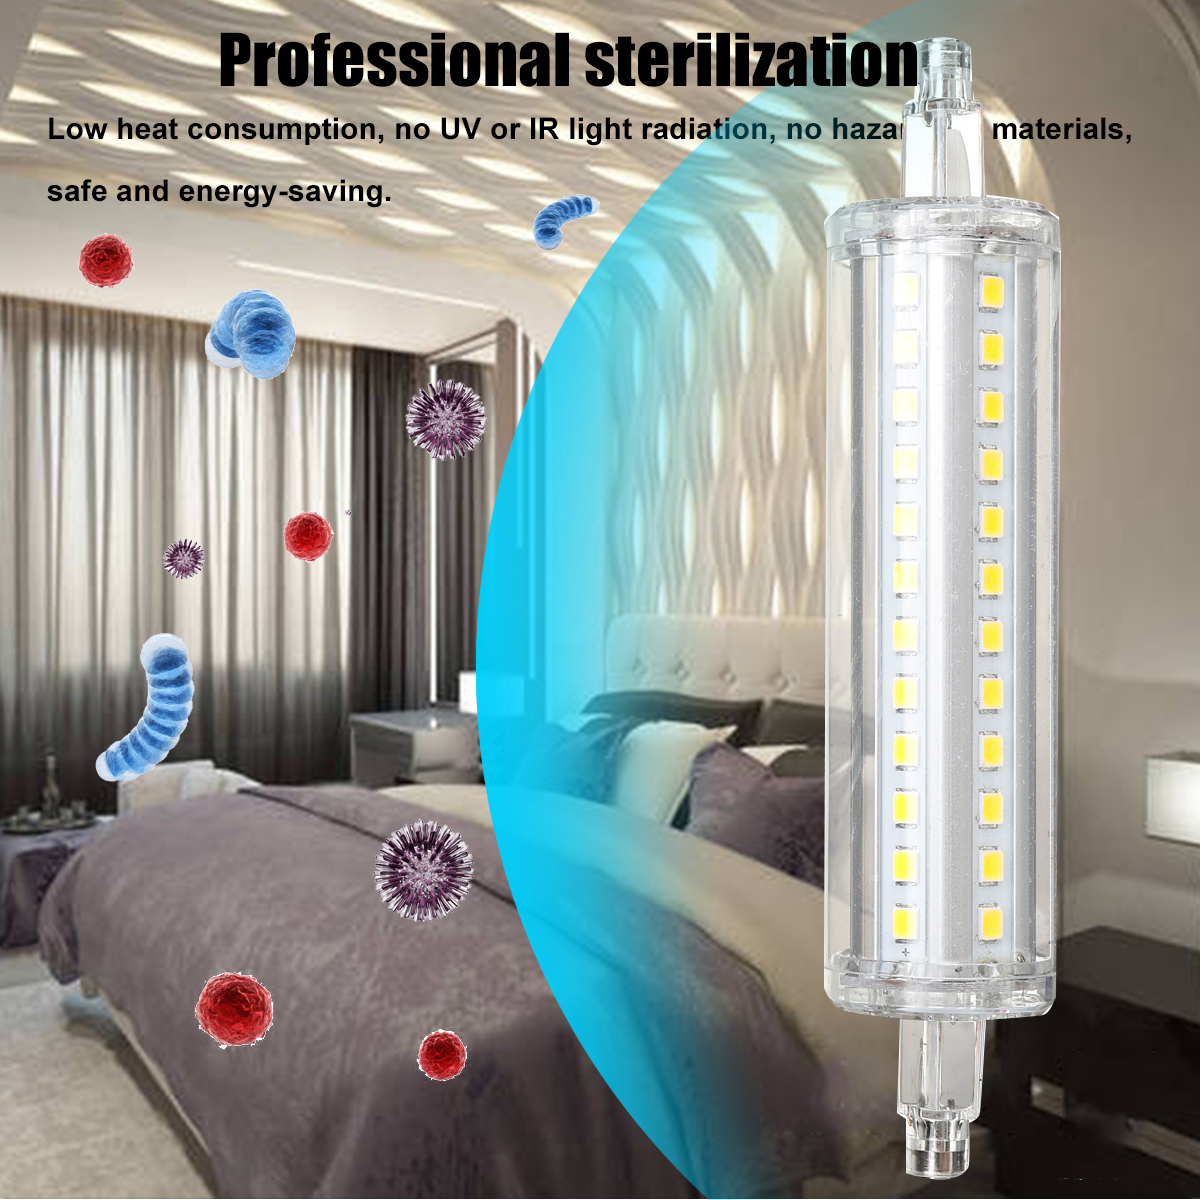 Dimmable-5W-10W-12W-15W-R7S-LED-Corn-Bulb-2835-SMD-Floodlight-Replace-Halogen-Lamp-Indoor-Home-Light-1728600-2